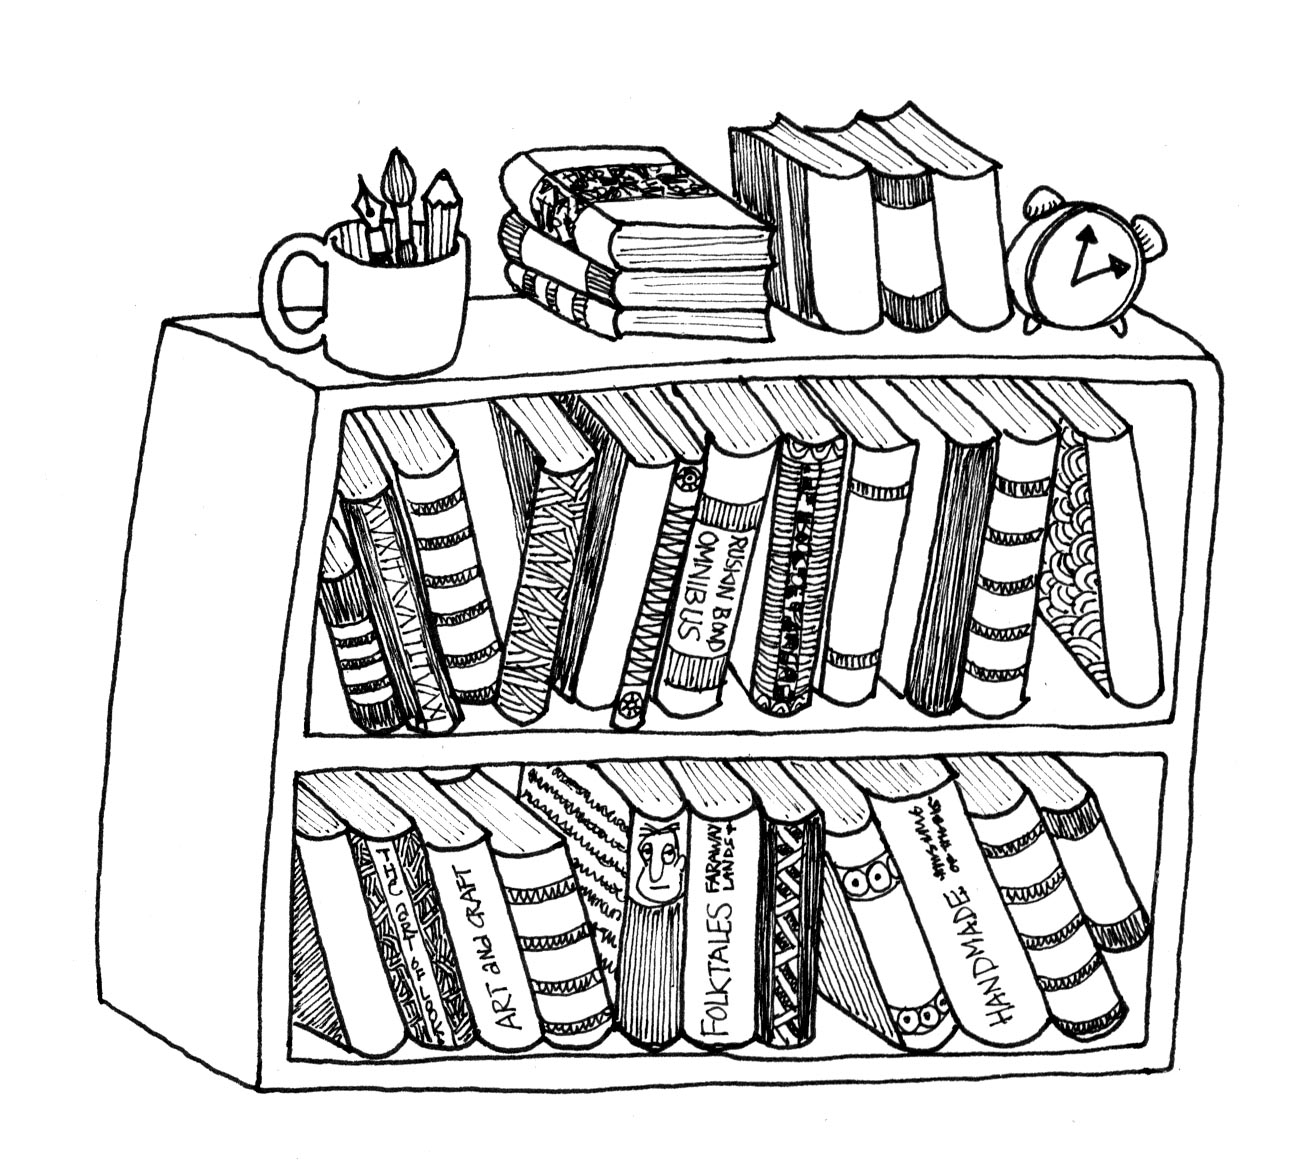 Cartoon Bookcase Drawing | Another Home Image Ideas